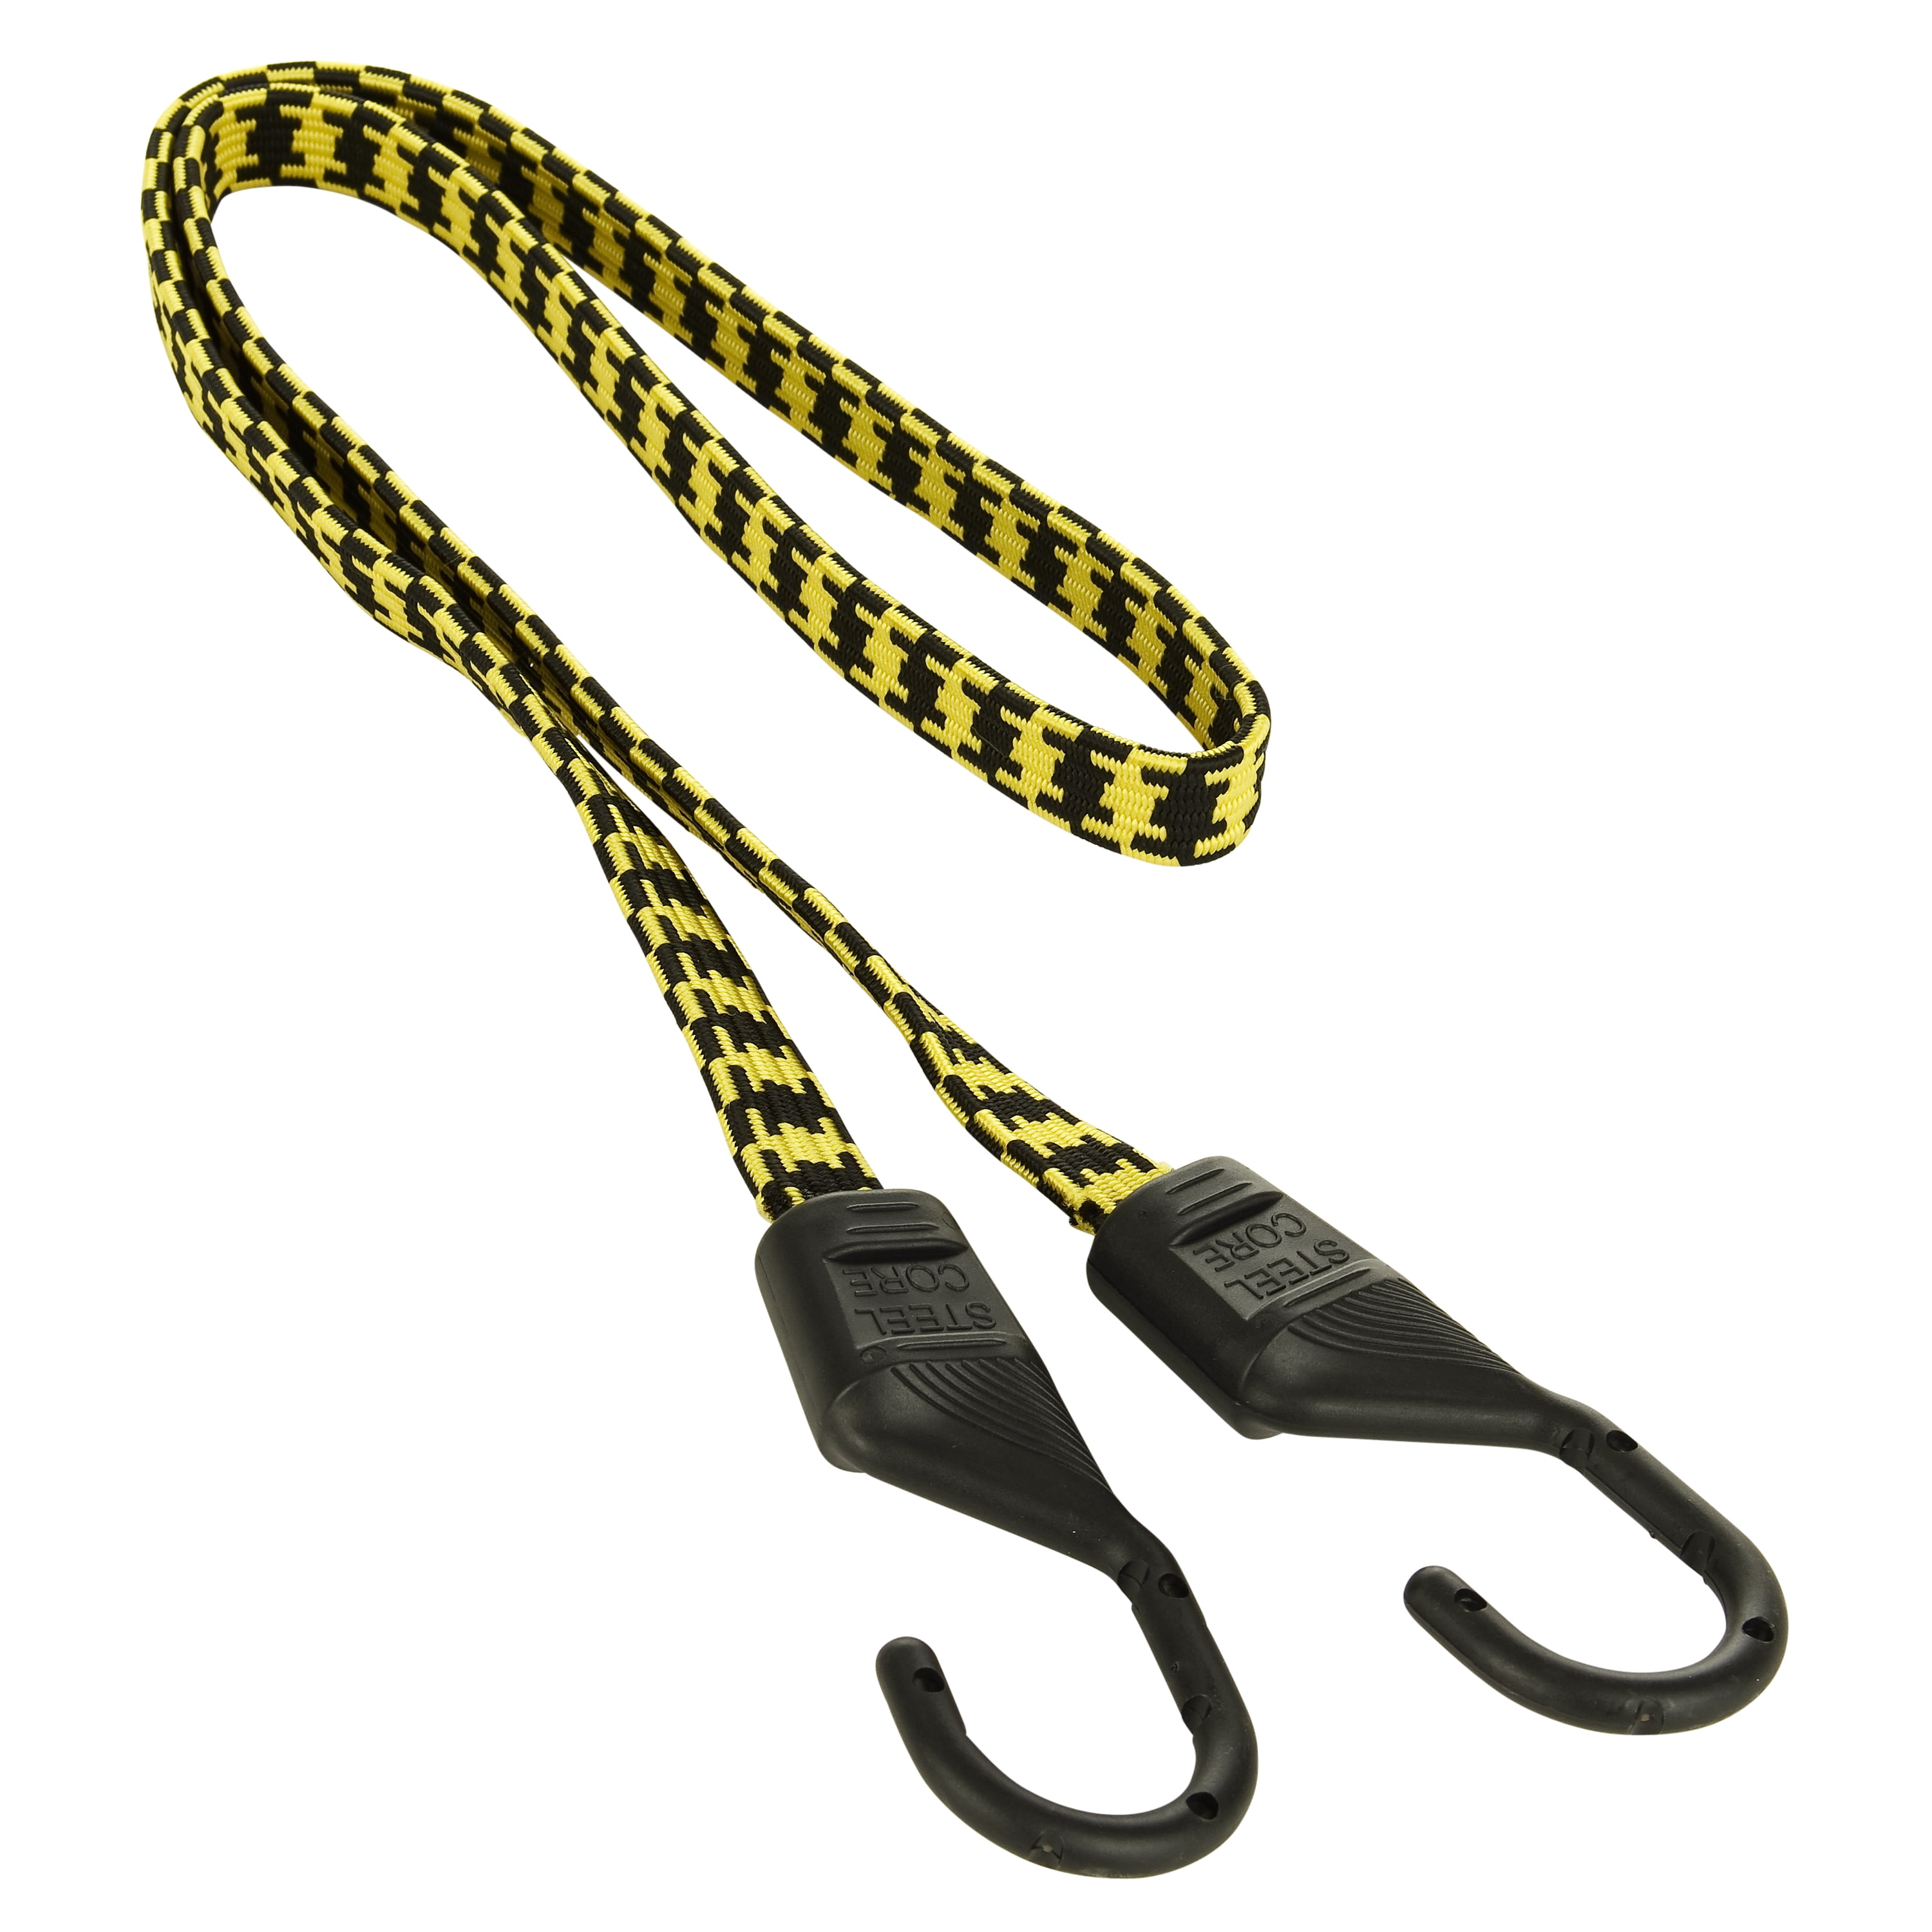 UV Resistant Strap Adjustable Length 48" Heavy Duty Flat Bungee Cord With Hook 